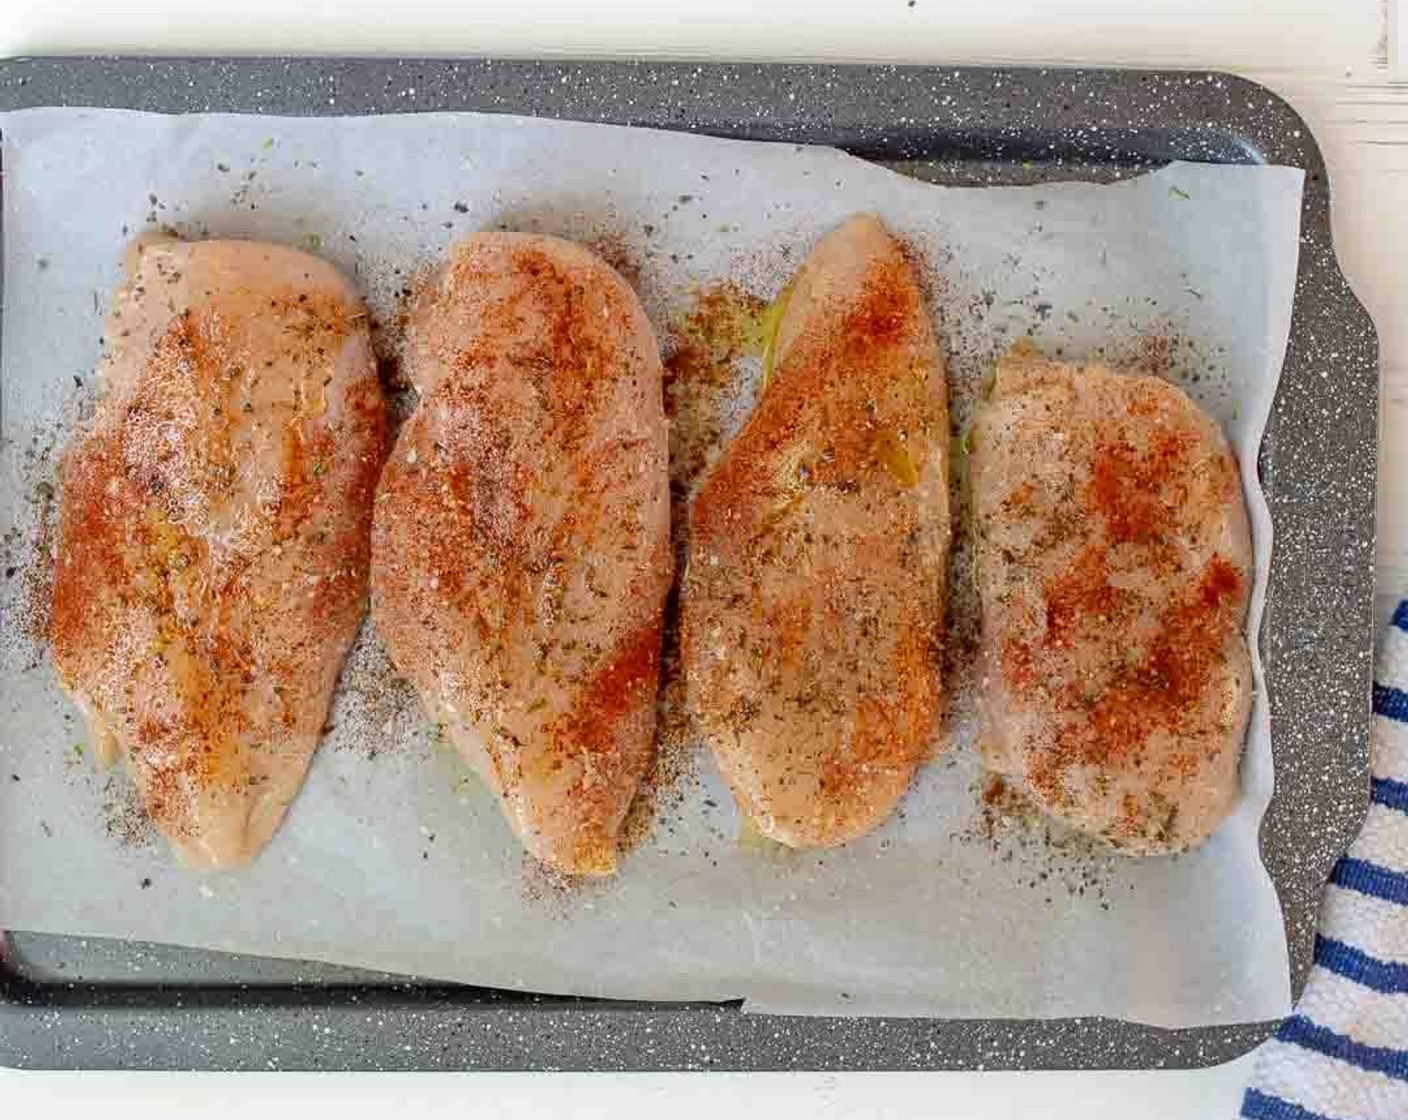 step 4 Place Boneless, Skinless Chicken Breasts (5) on the prepared baking sheet. On top of each chicken breast drizzle a little olive oil and sprinkle with Italian Seasoning (to taste), Garlic Salt (to taste) and Paprika (to taste). Use your hands to spread olive oil and seasonings evenly over the top of chicken breasts.